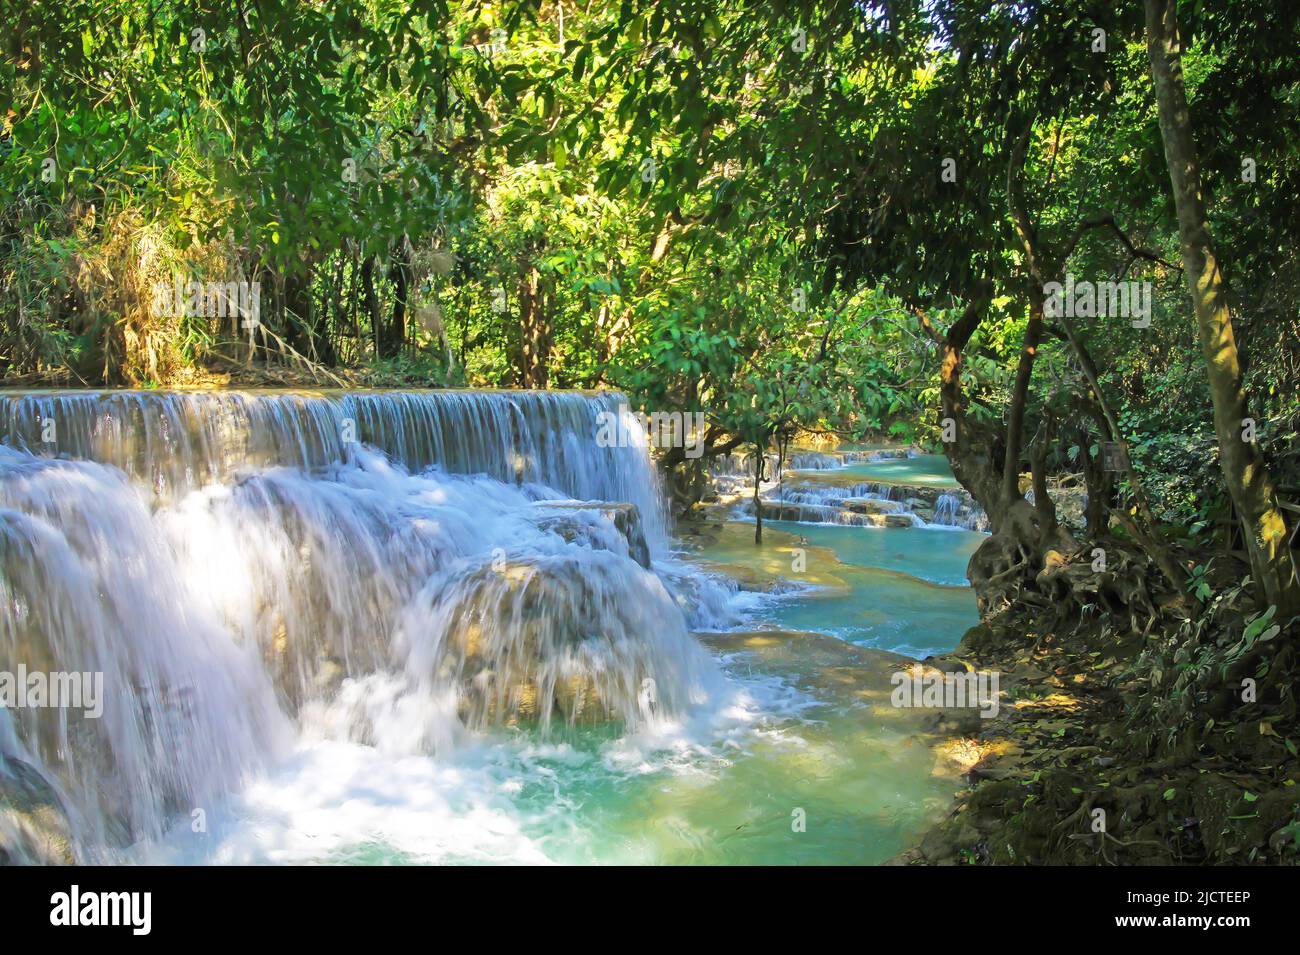 Beautiful secluded lonely tropical waterfall landscape, green jungle forest, rock cascade, blue turquoise river  - Kuang Si, Luang Prabang, Laos Stock Photo